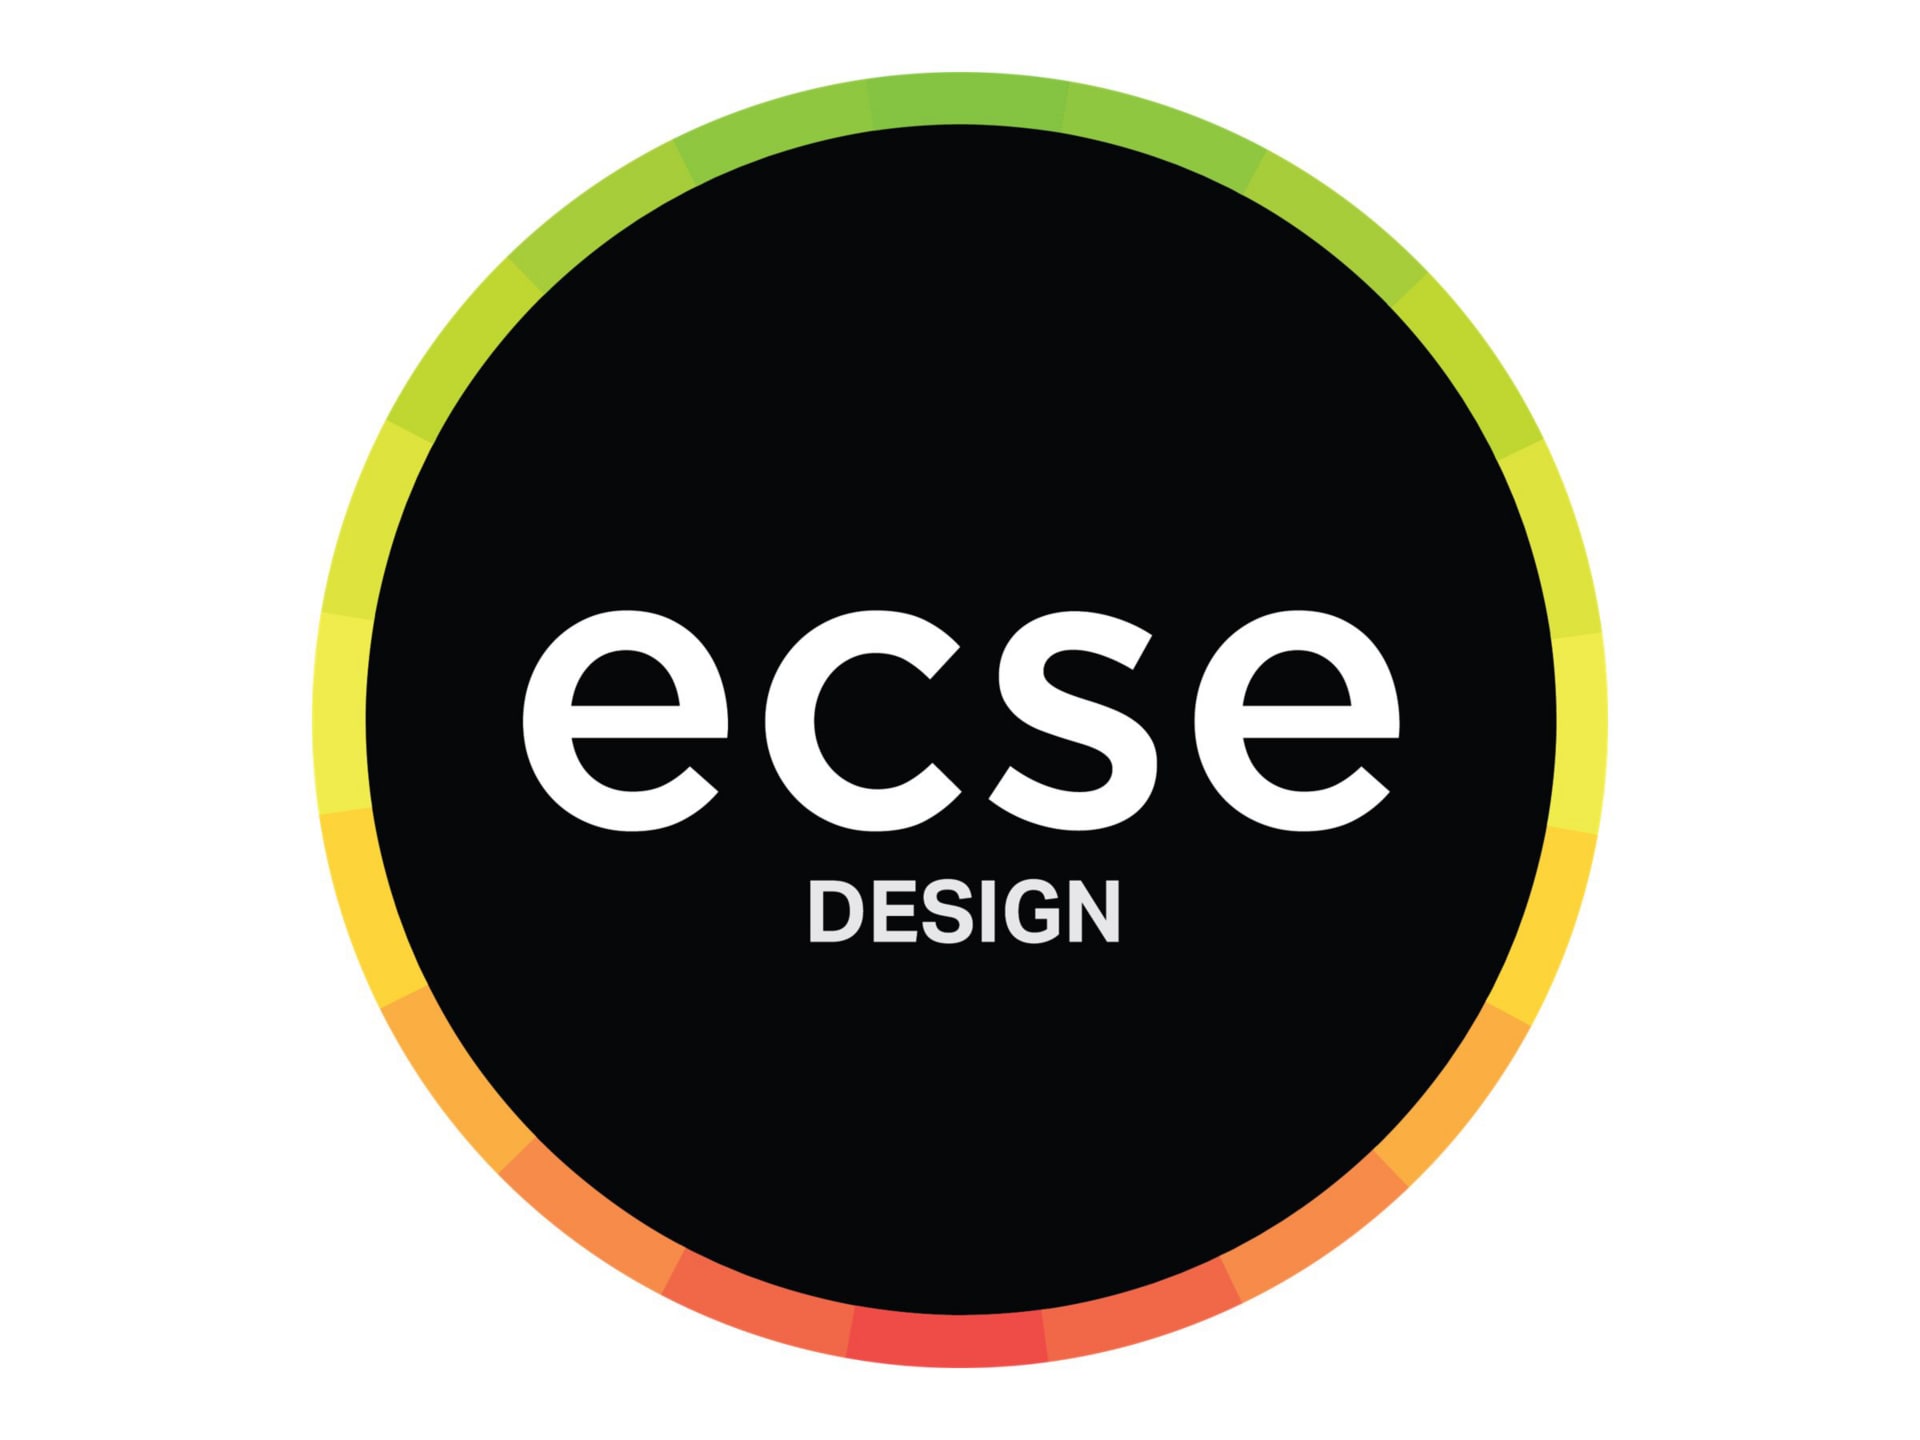 ECSE Design - Learn the Basics of Wi-Fi and How to Use Ekahau - lectures and labs